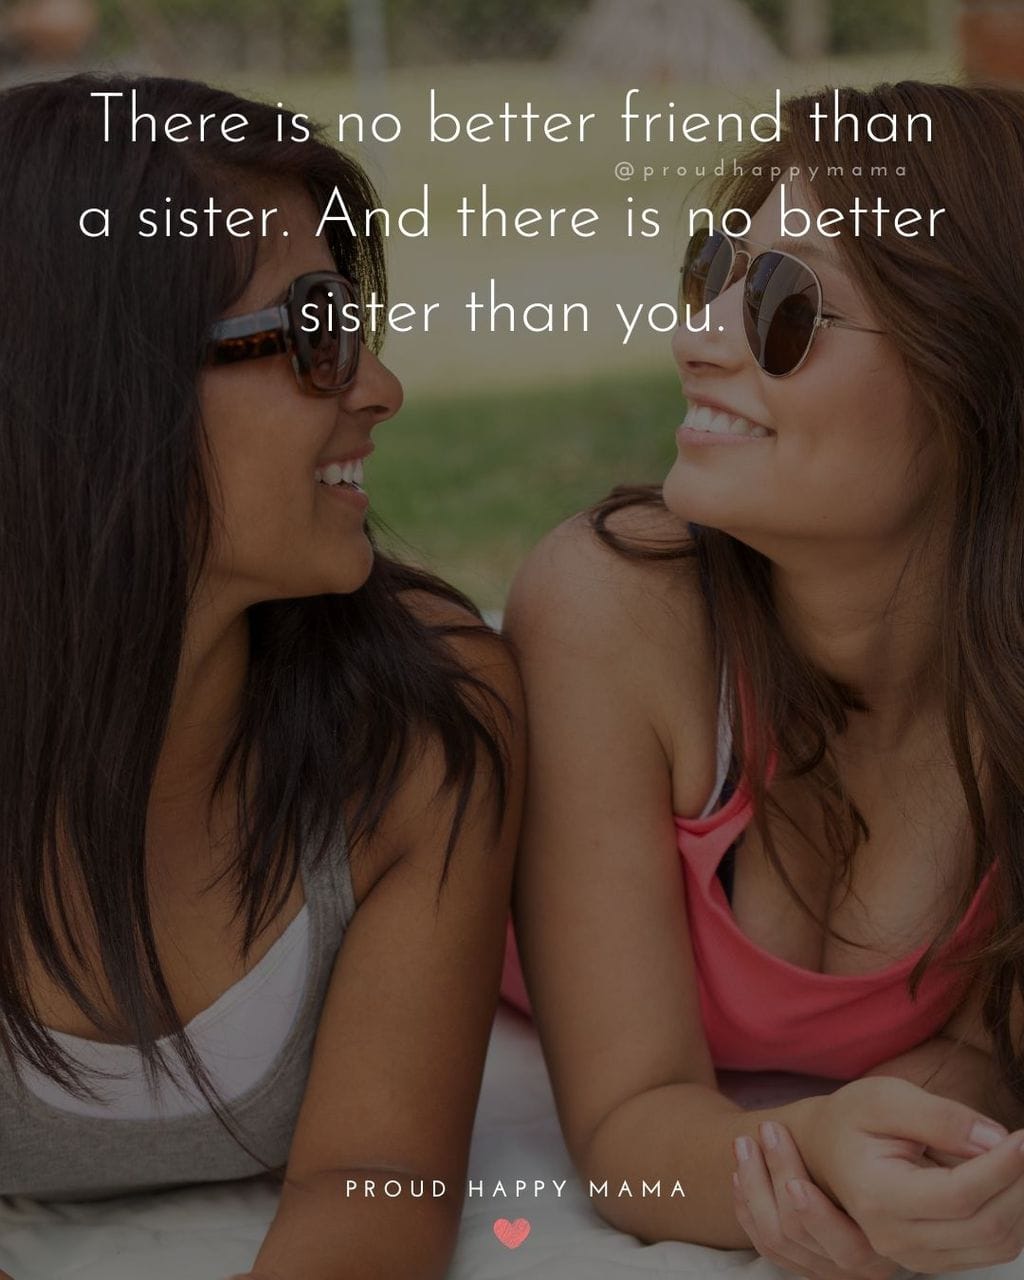 Sister Quotes - There is no better friend than a sister. And there is no better sister than you.